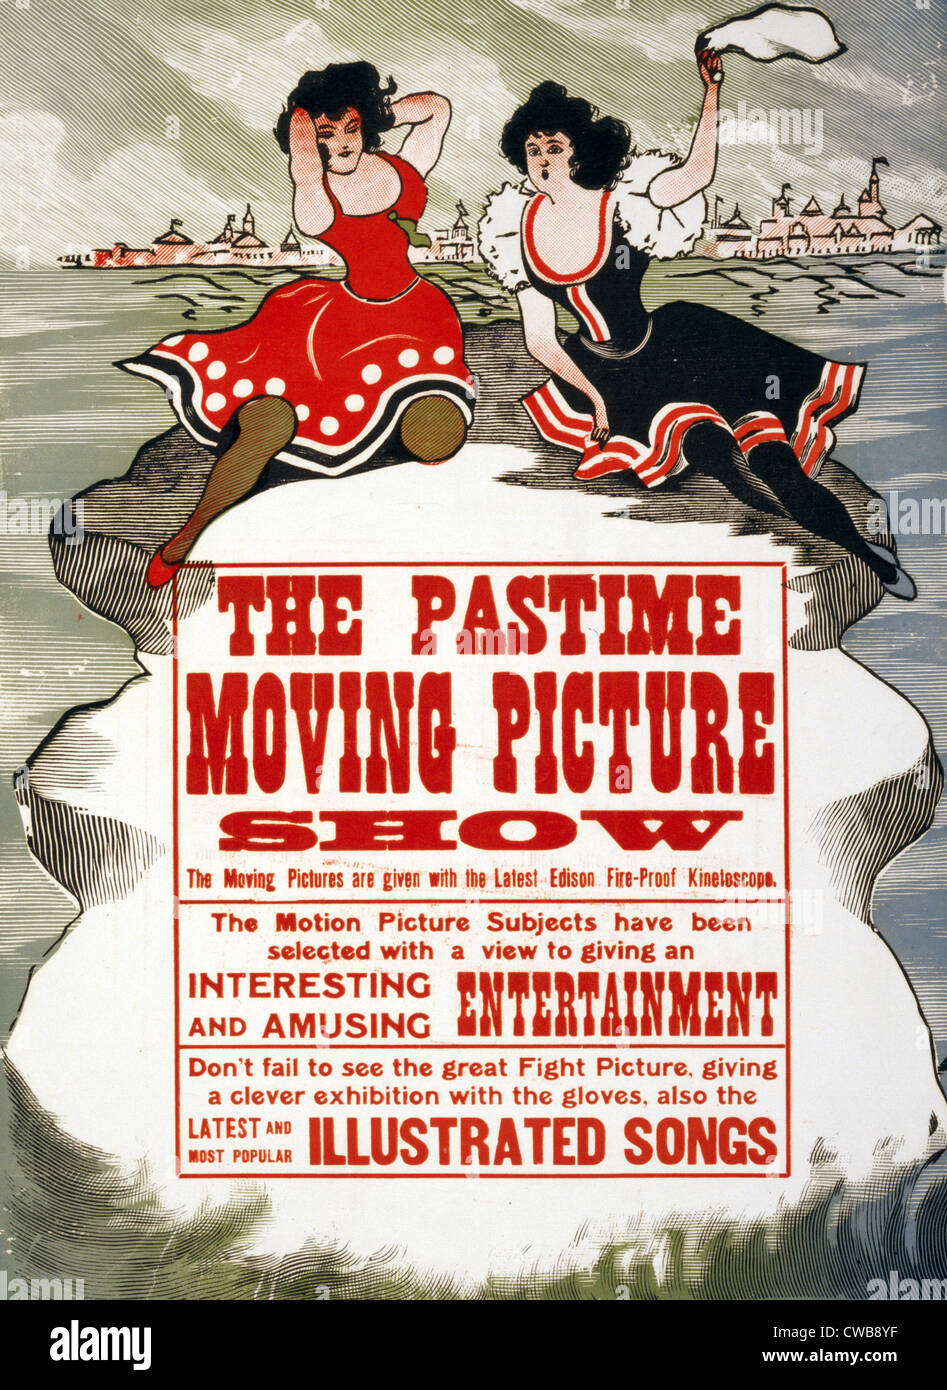 The Pastime Moving Picture Show, advertising for Thomas Edison's kinetoscope films, circa late 1800s. Stock Photo